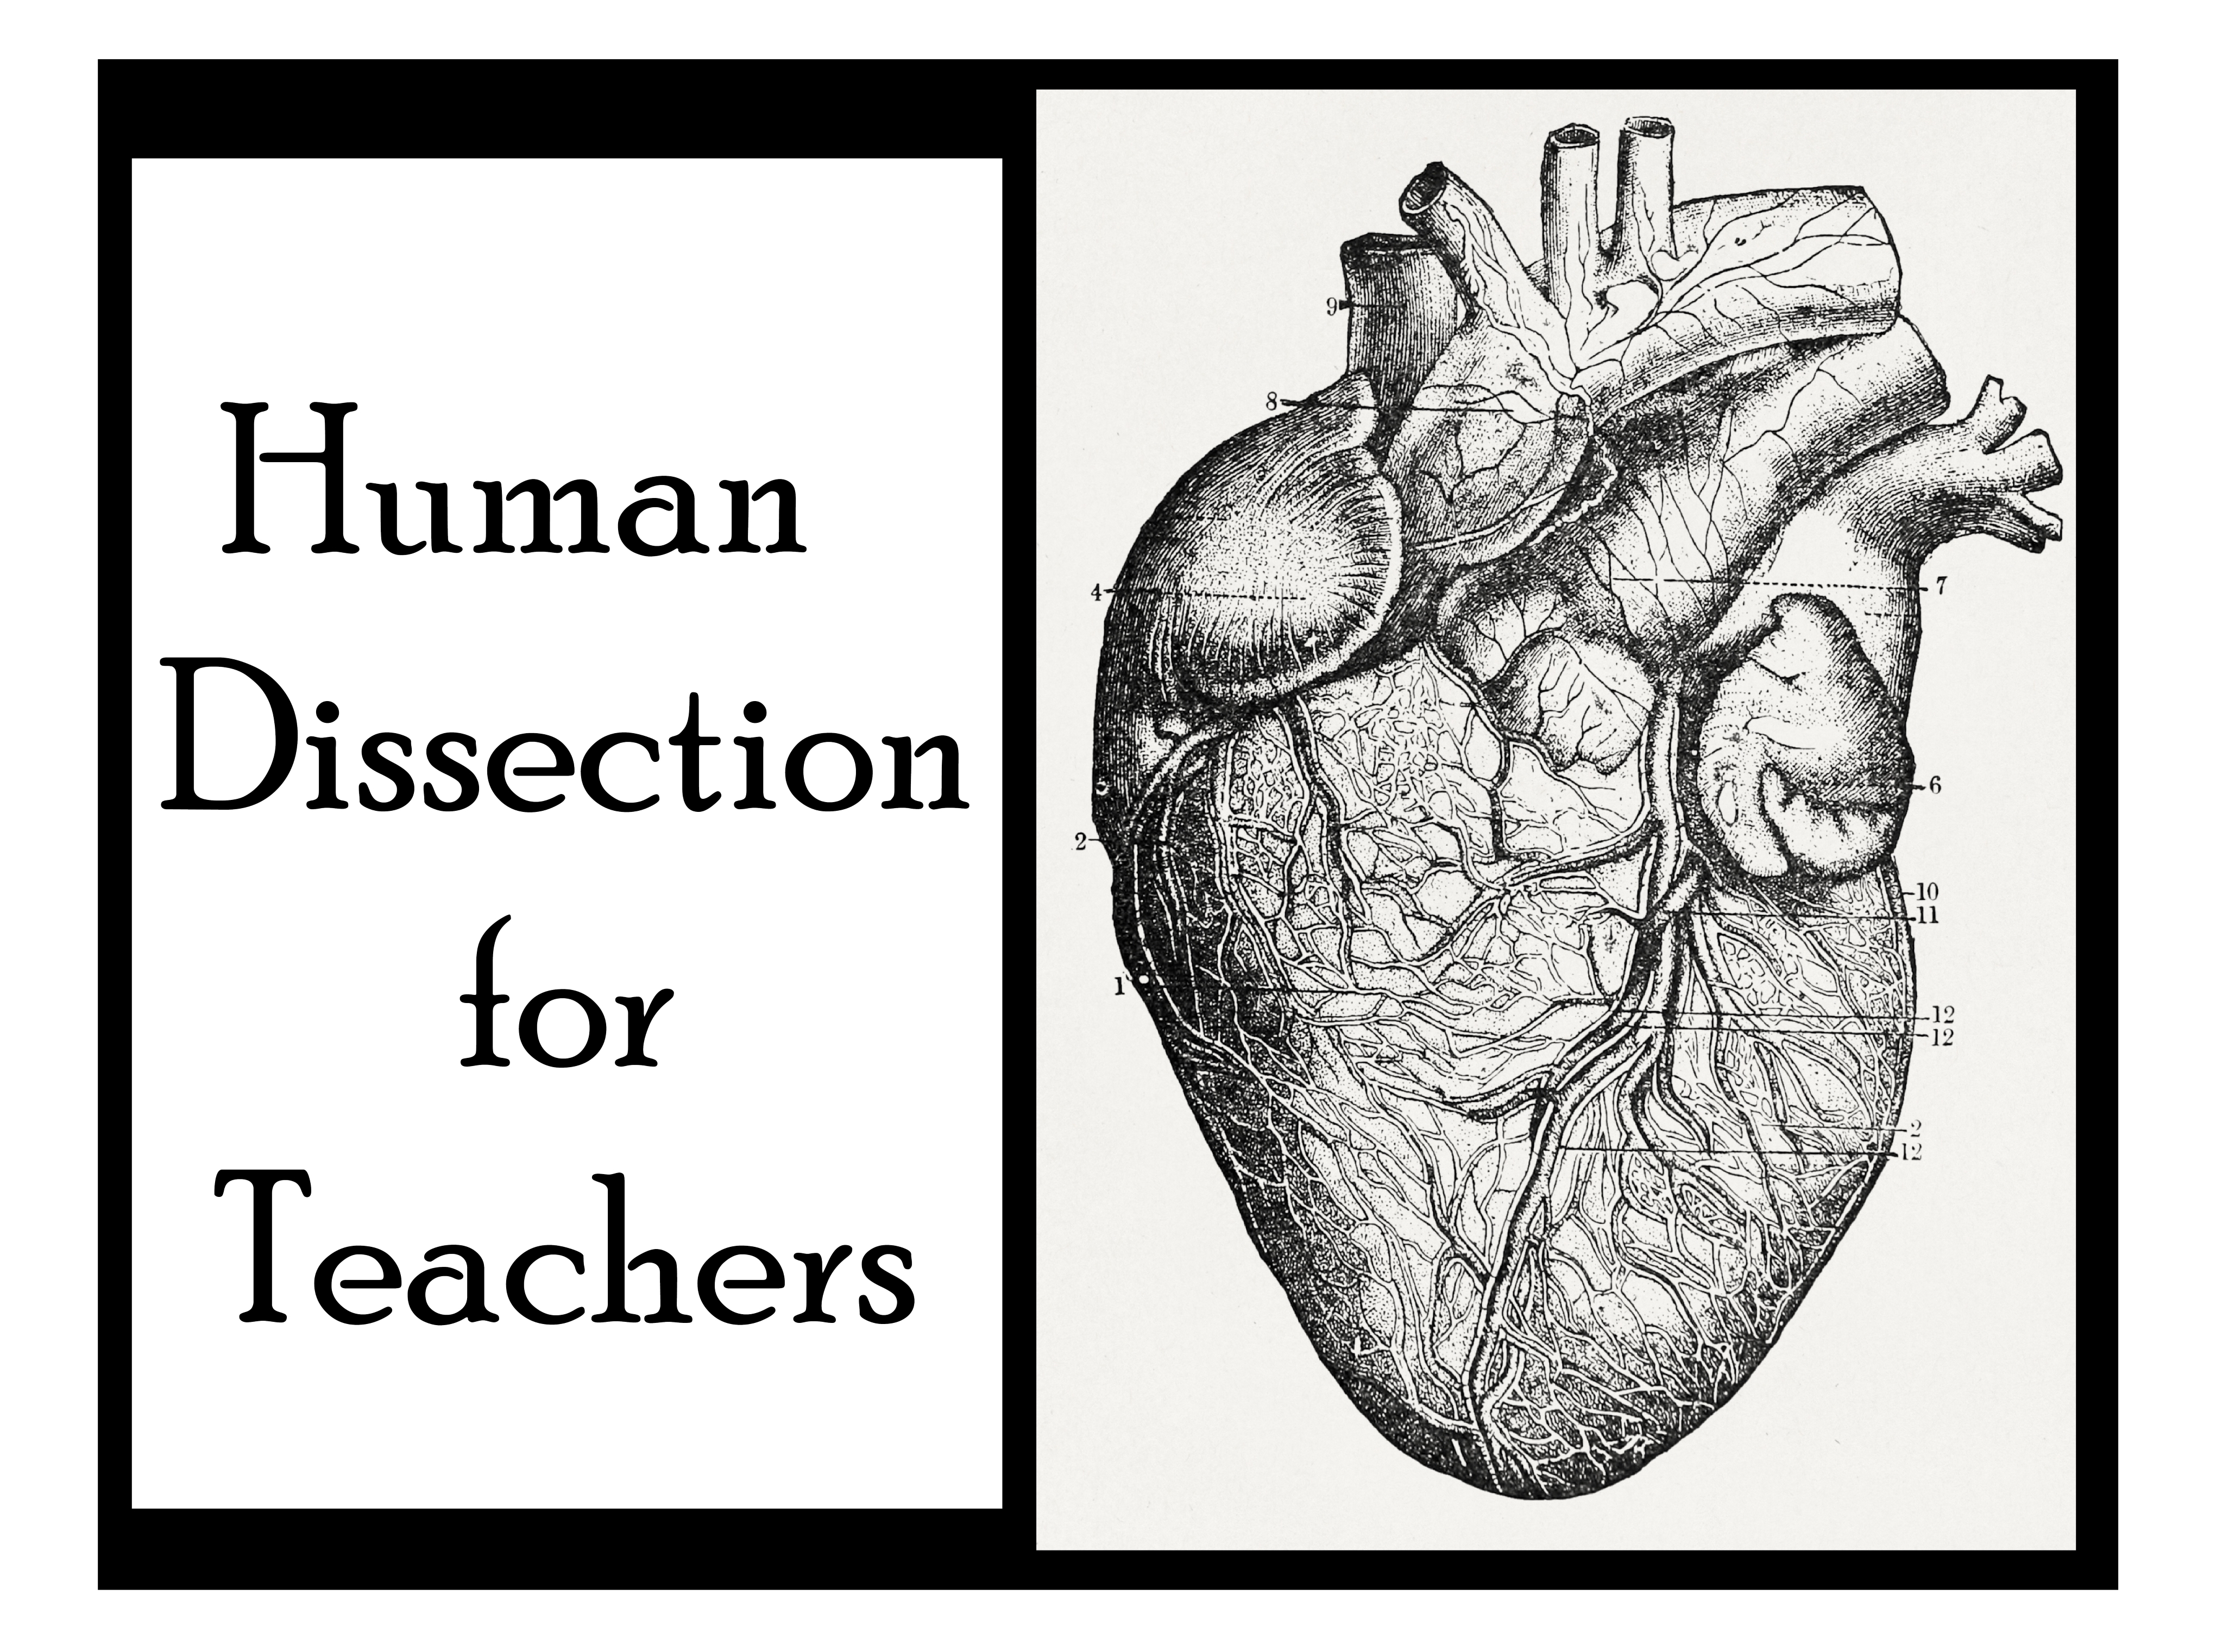 Human dissection for teachers course photo